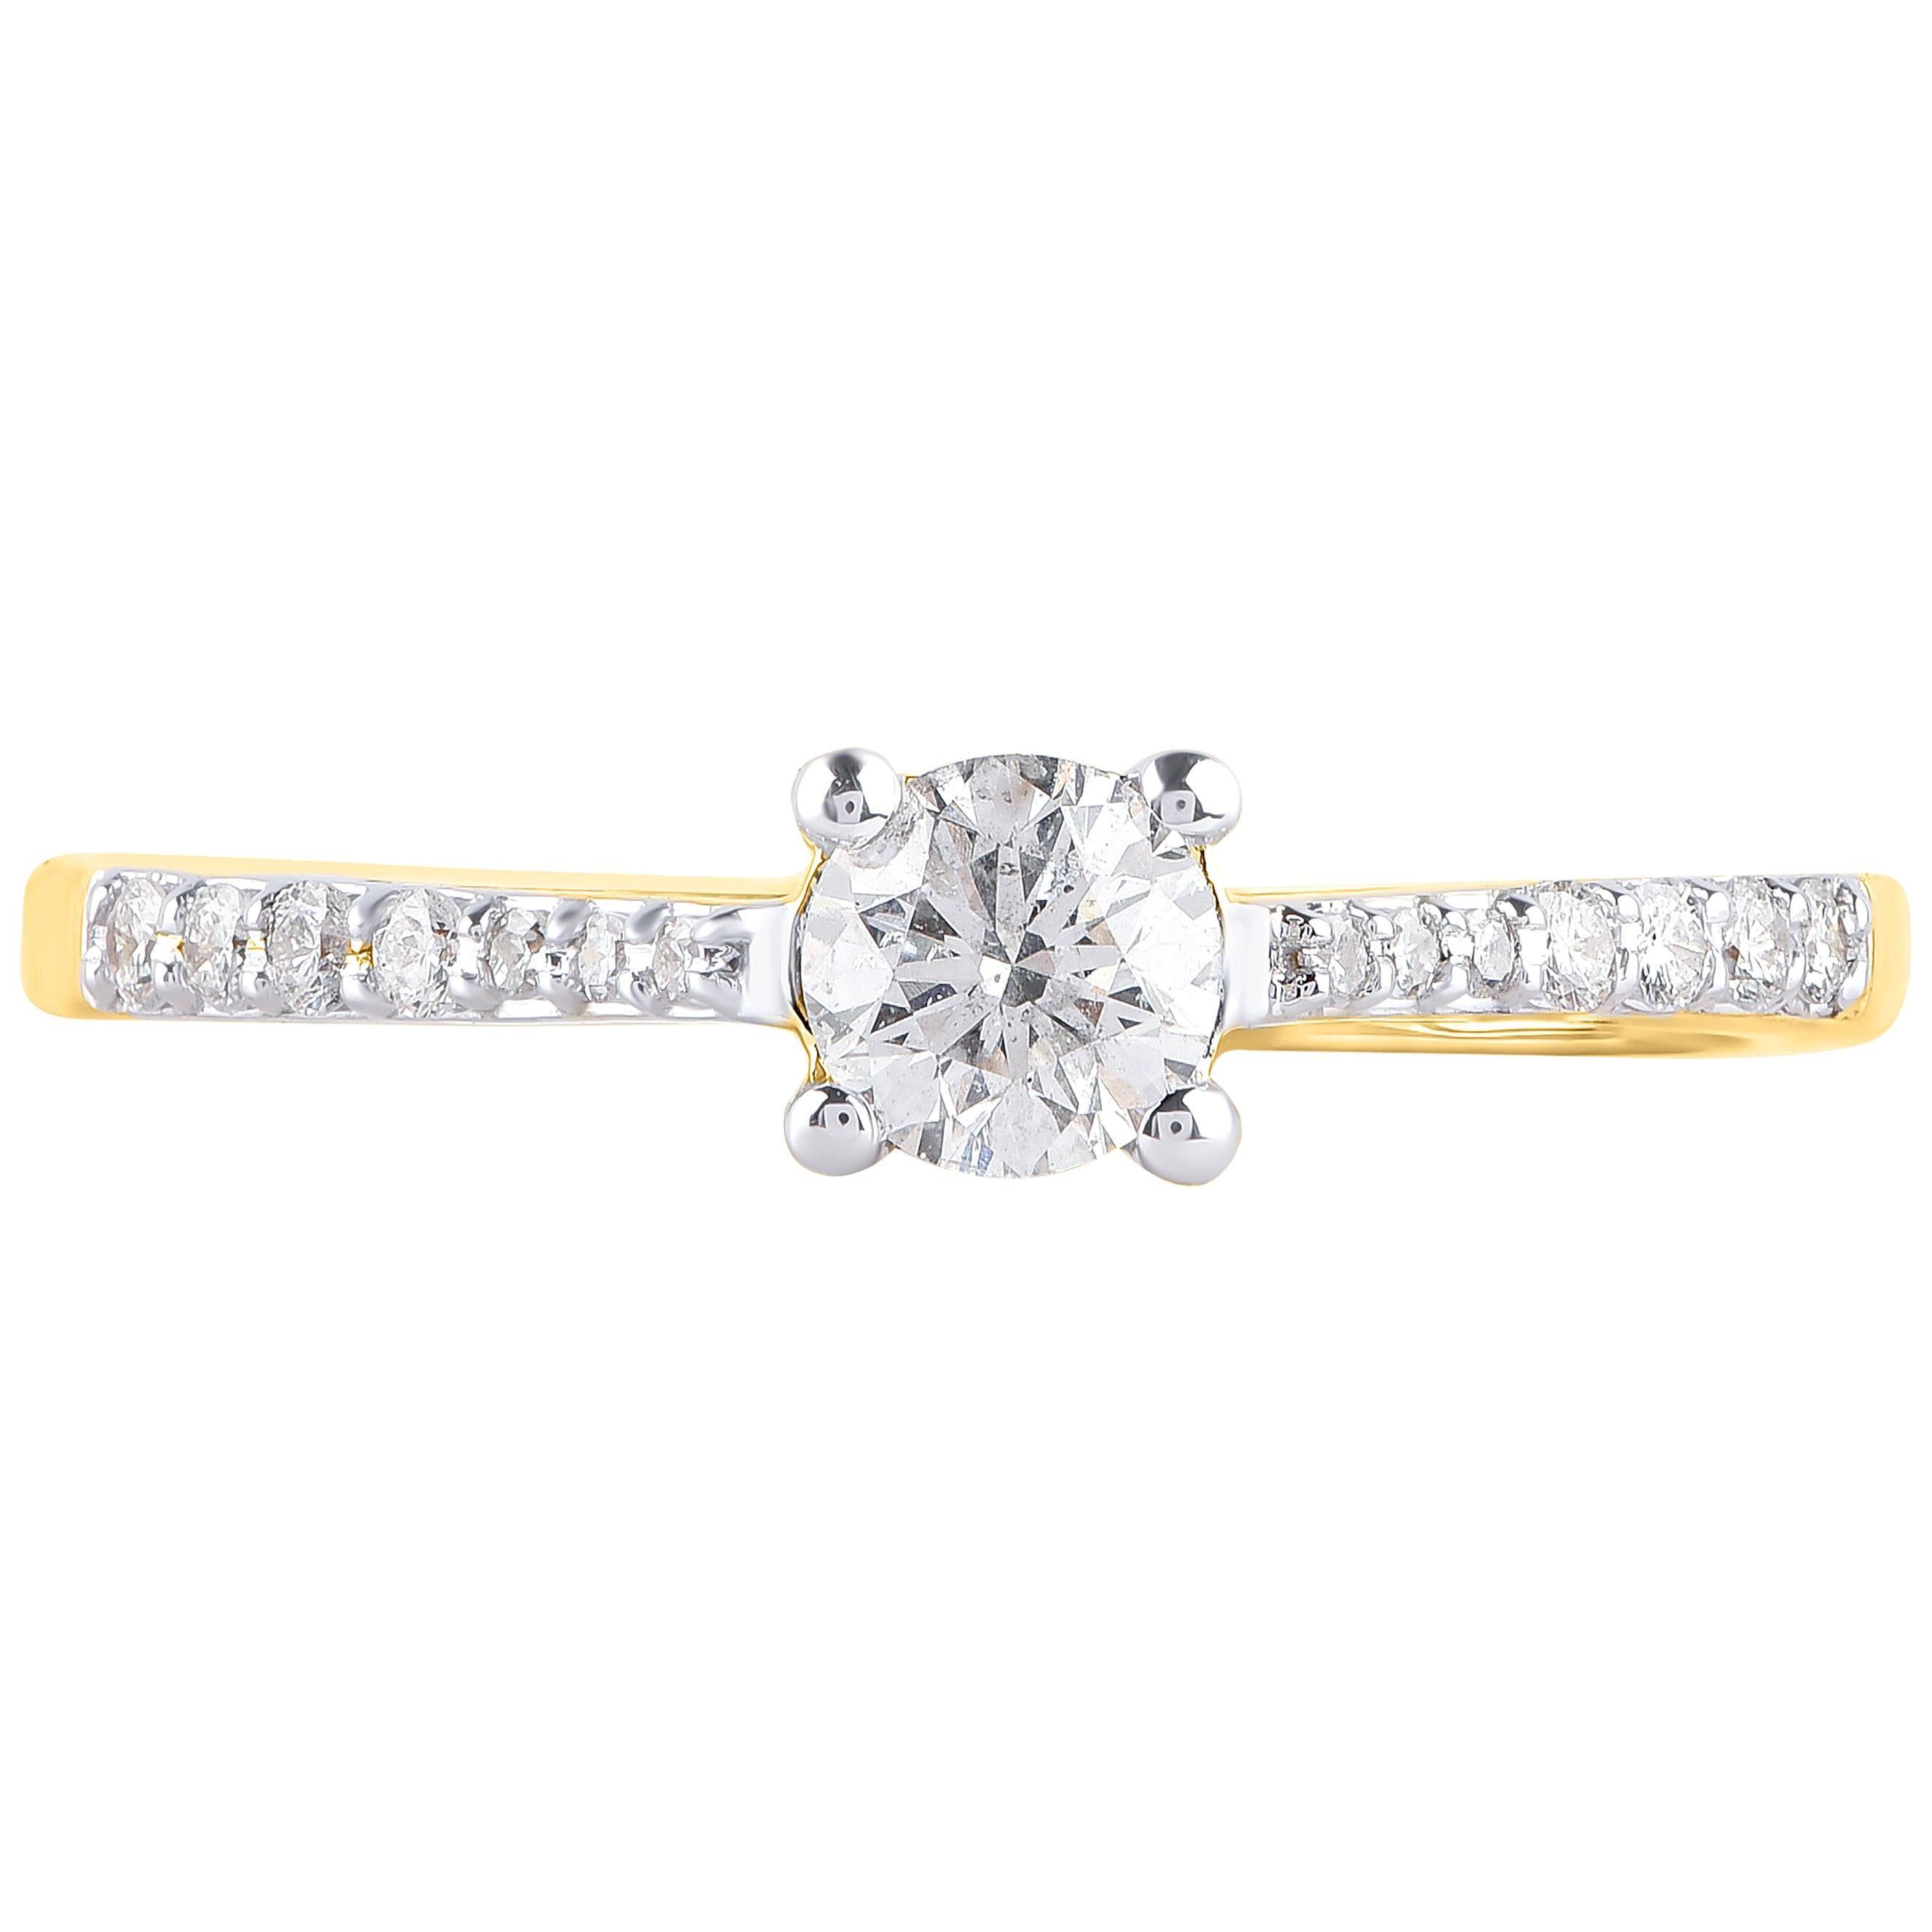 TJD 0.35 Carat Diamond 18 Karat Yellow Gold Charming Classic Solitaire Ring For Sale